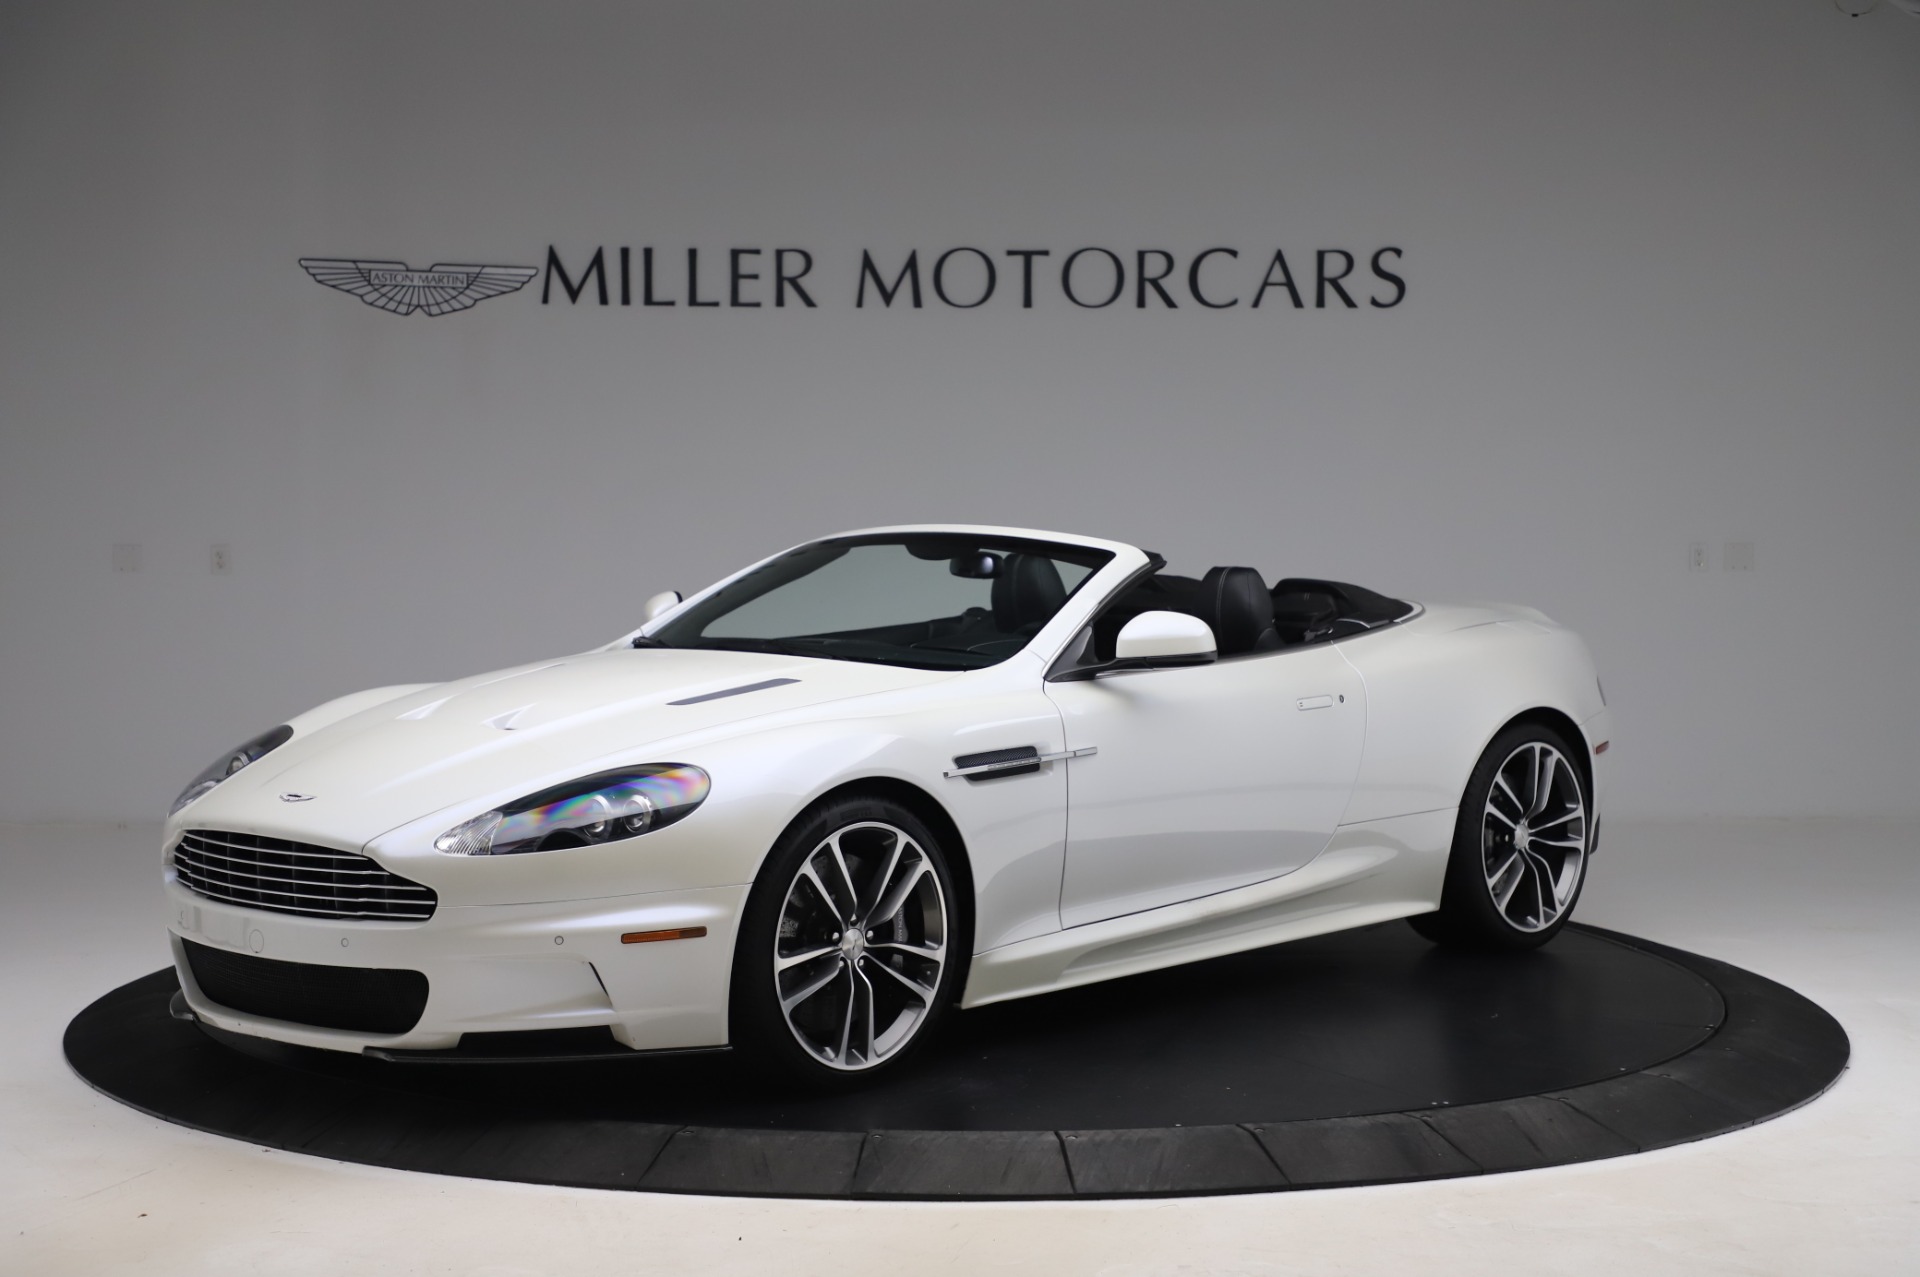 Used 2010 Aston Martin DBS Volante for sale Sold at Bentley Greenwich in Greenwich CT 06830 1